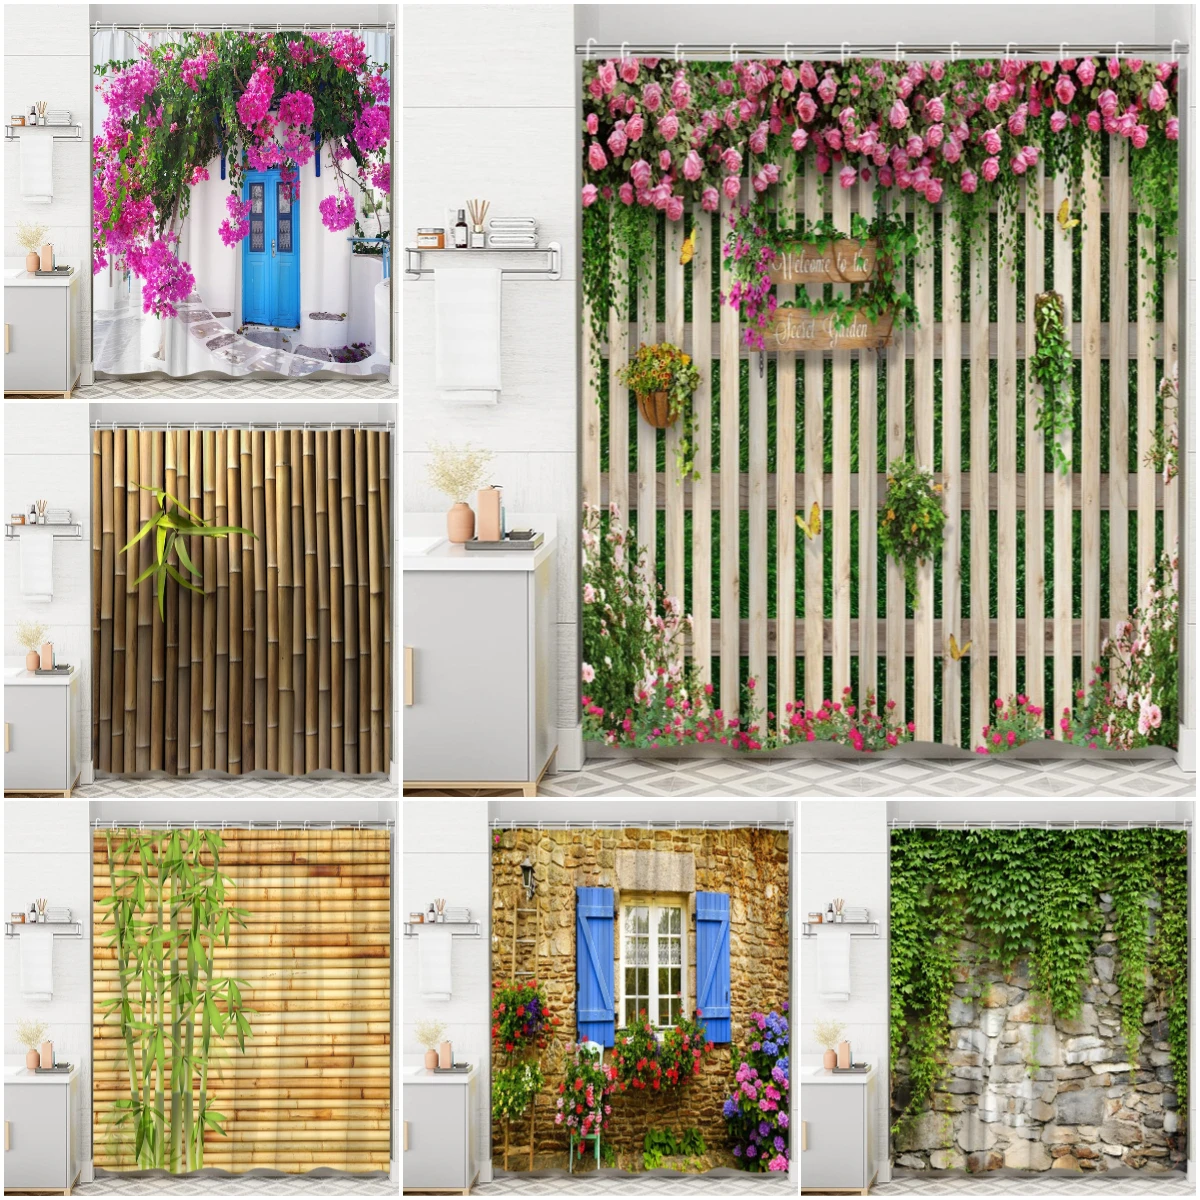 Flower Wall Shower Curtain, Street View Spring Greenery Vines Bamboo Farm Brick Wall Home Bathroom Decor with Hooks spring and autumn fashion zipper men s set couple street jogging pullover outdoor leisure mountaineering hot selling sportswear